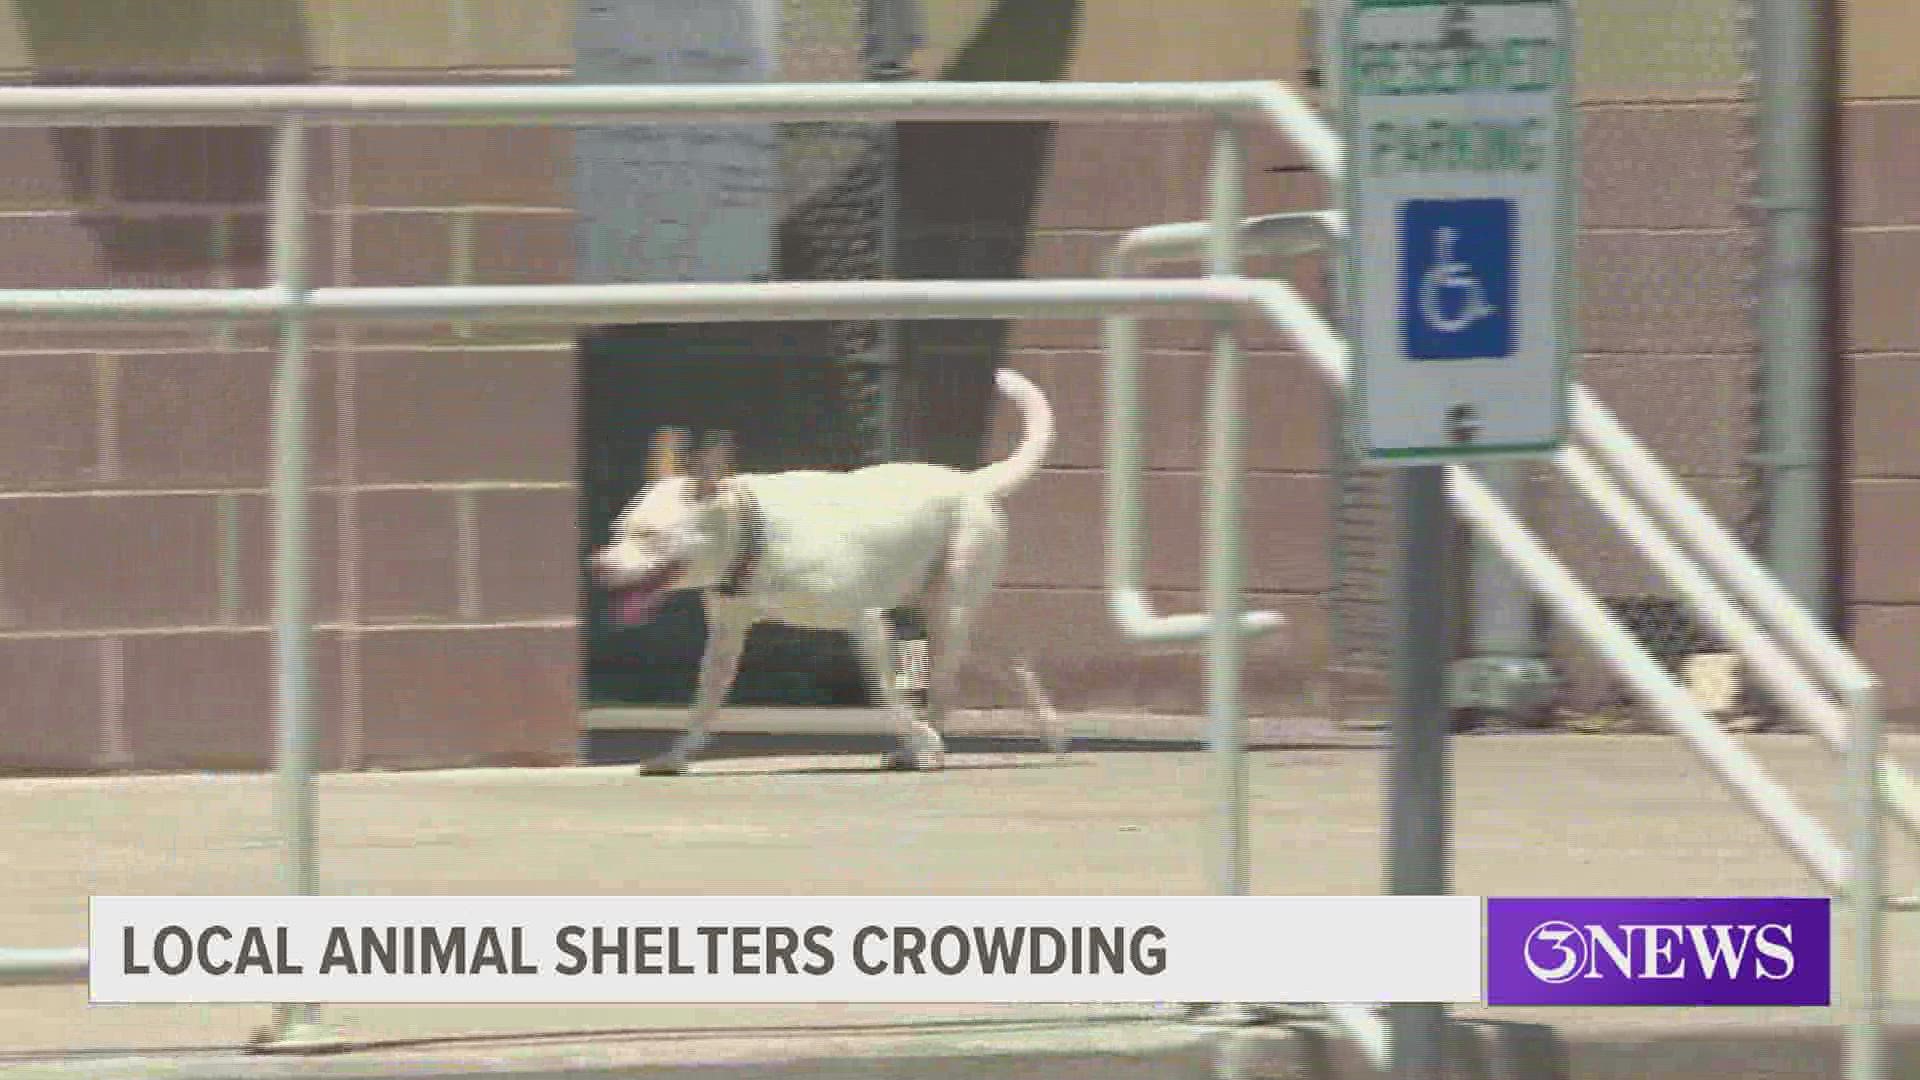 City Mayor Paulette Guajardo said this has been an important issue for her since she created the "Mayor's Animal Care Advisory Committee" when she took office.